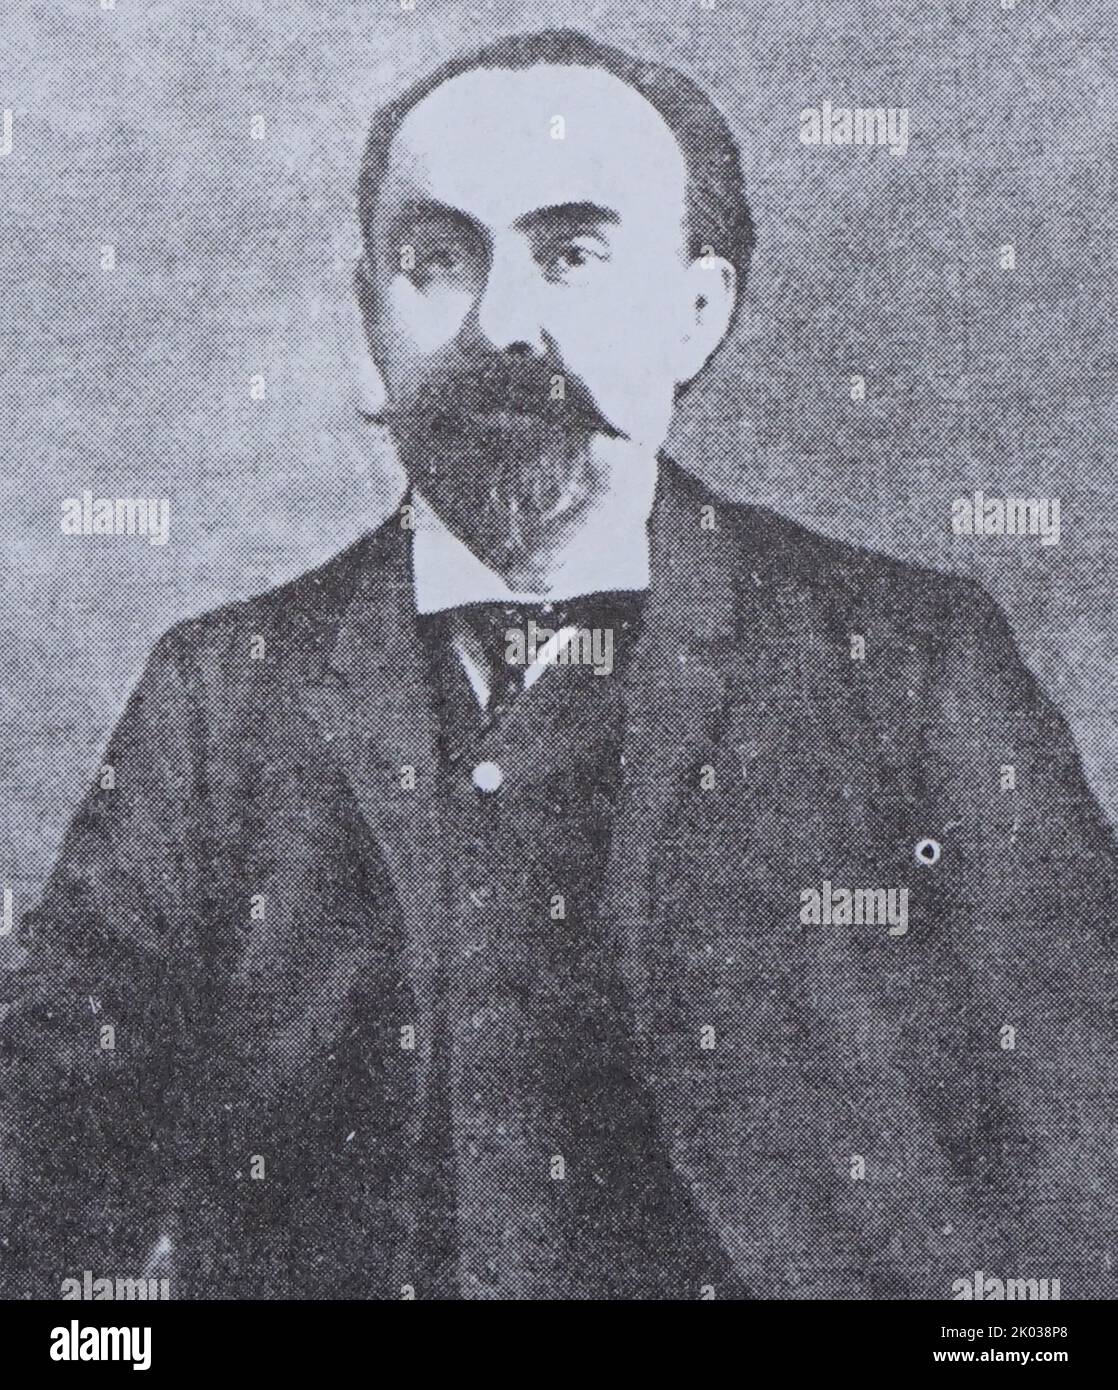 G. V. Plekhanov was a Russian revolutionary, philosopher and a Marxist theoretician. He was a founder of the social-democratic movement in Russia and was one of the first Russians to identify himself as 'Marxist'. Stock Photo